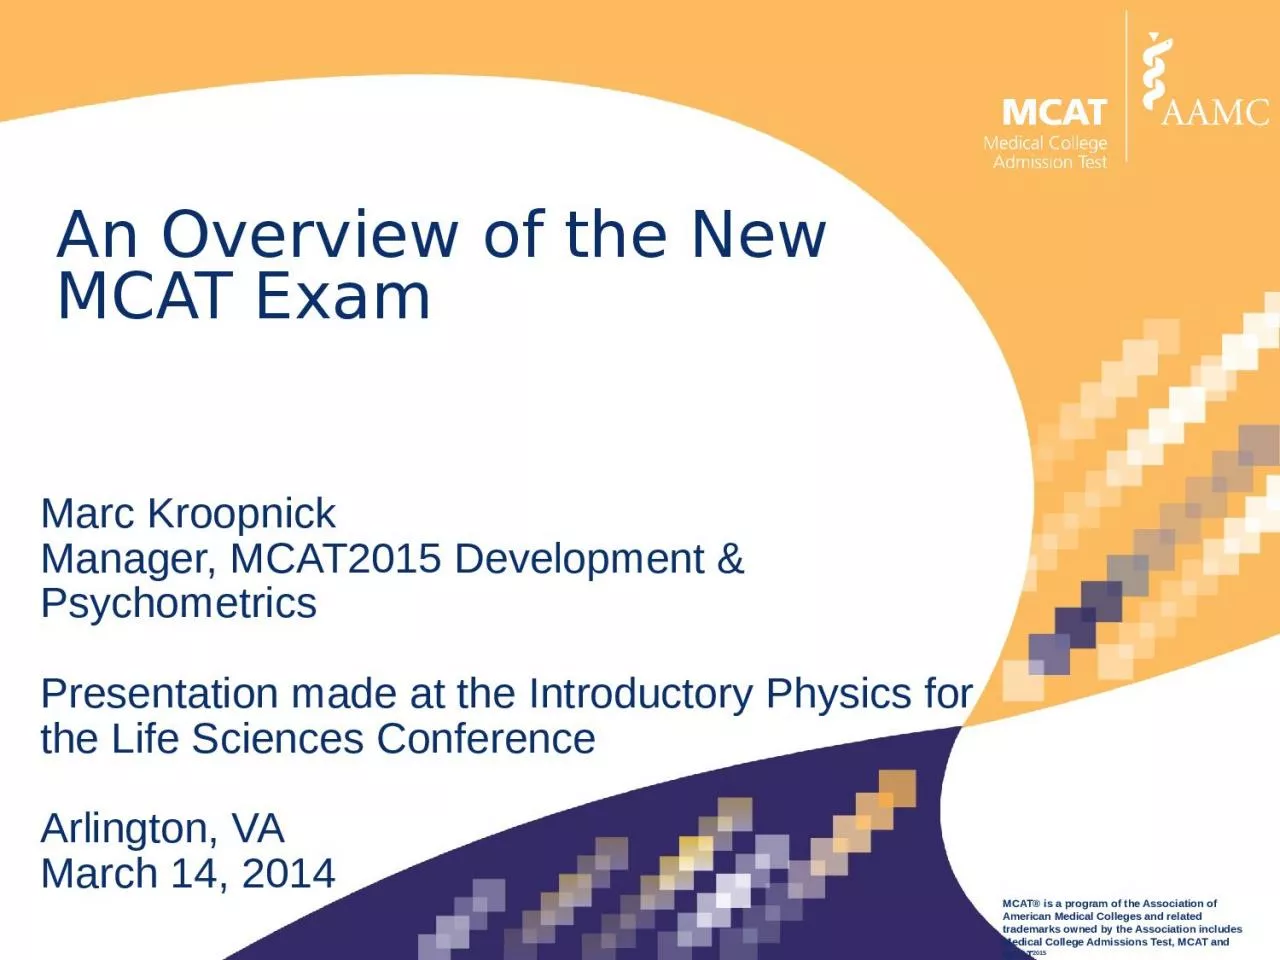 An Overview of the New MCAT Exam